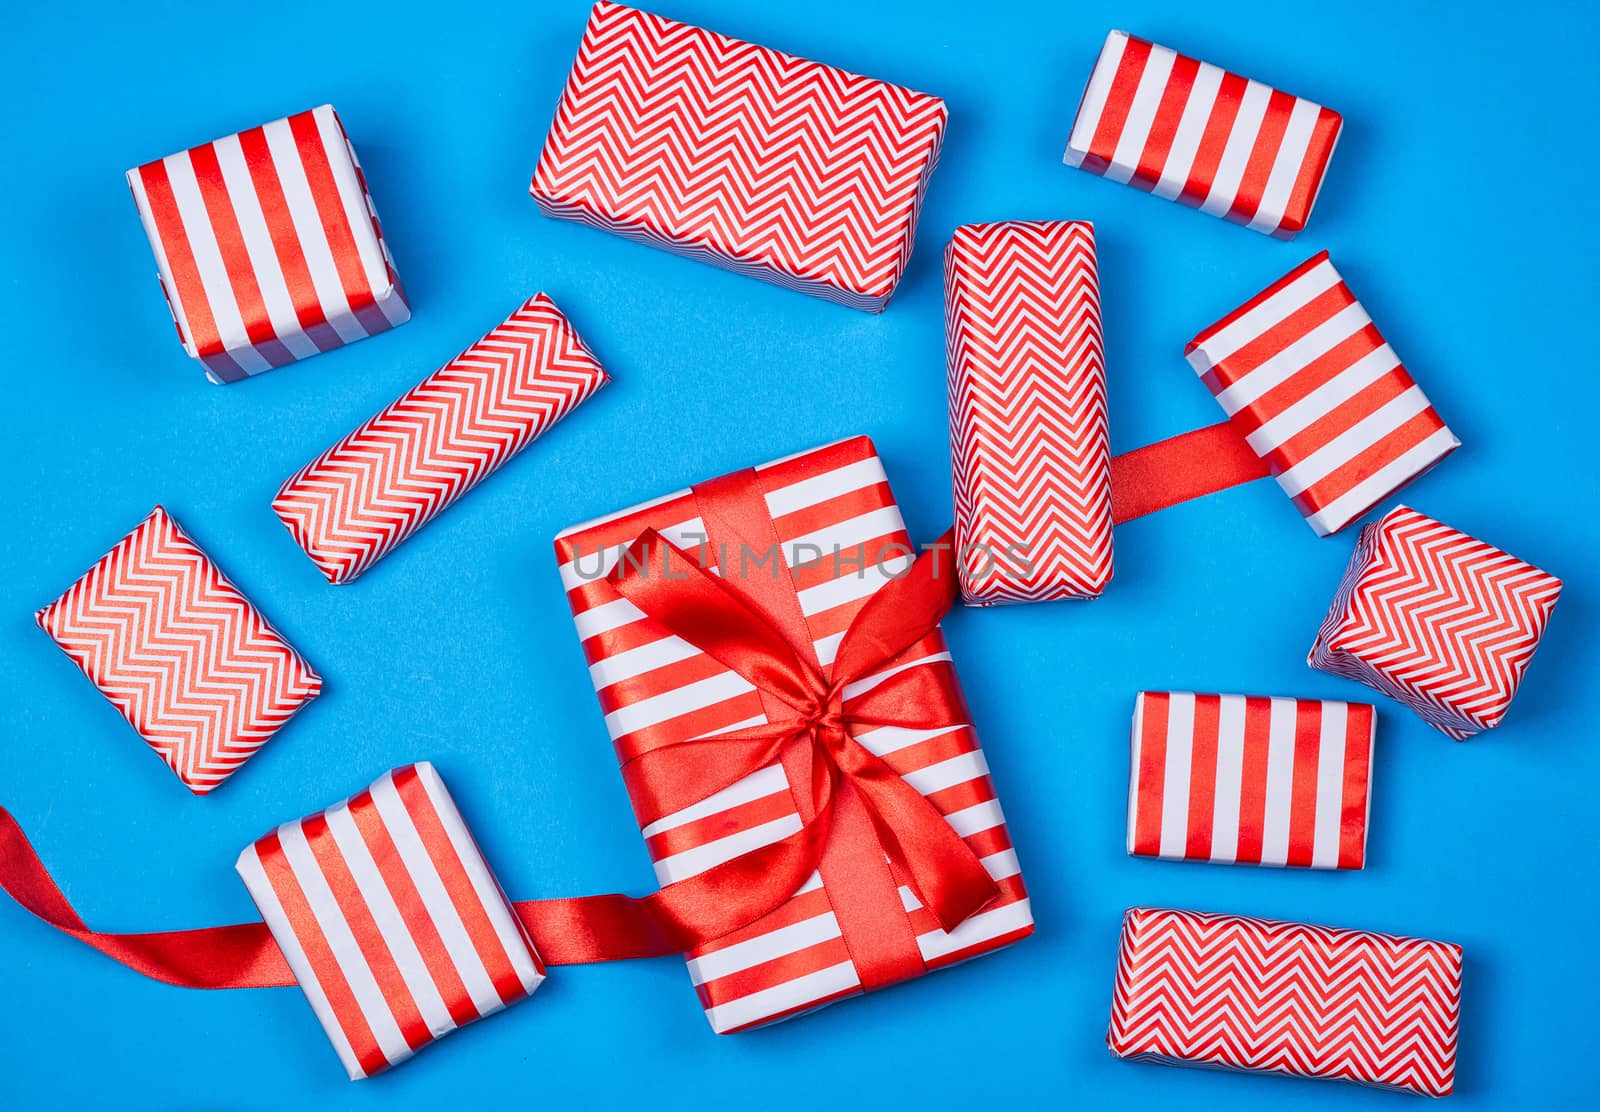 Top view of red and white gifts on the blue background